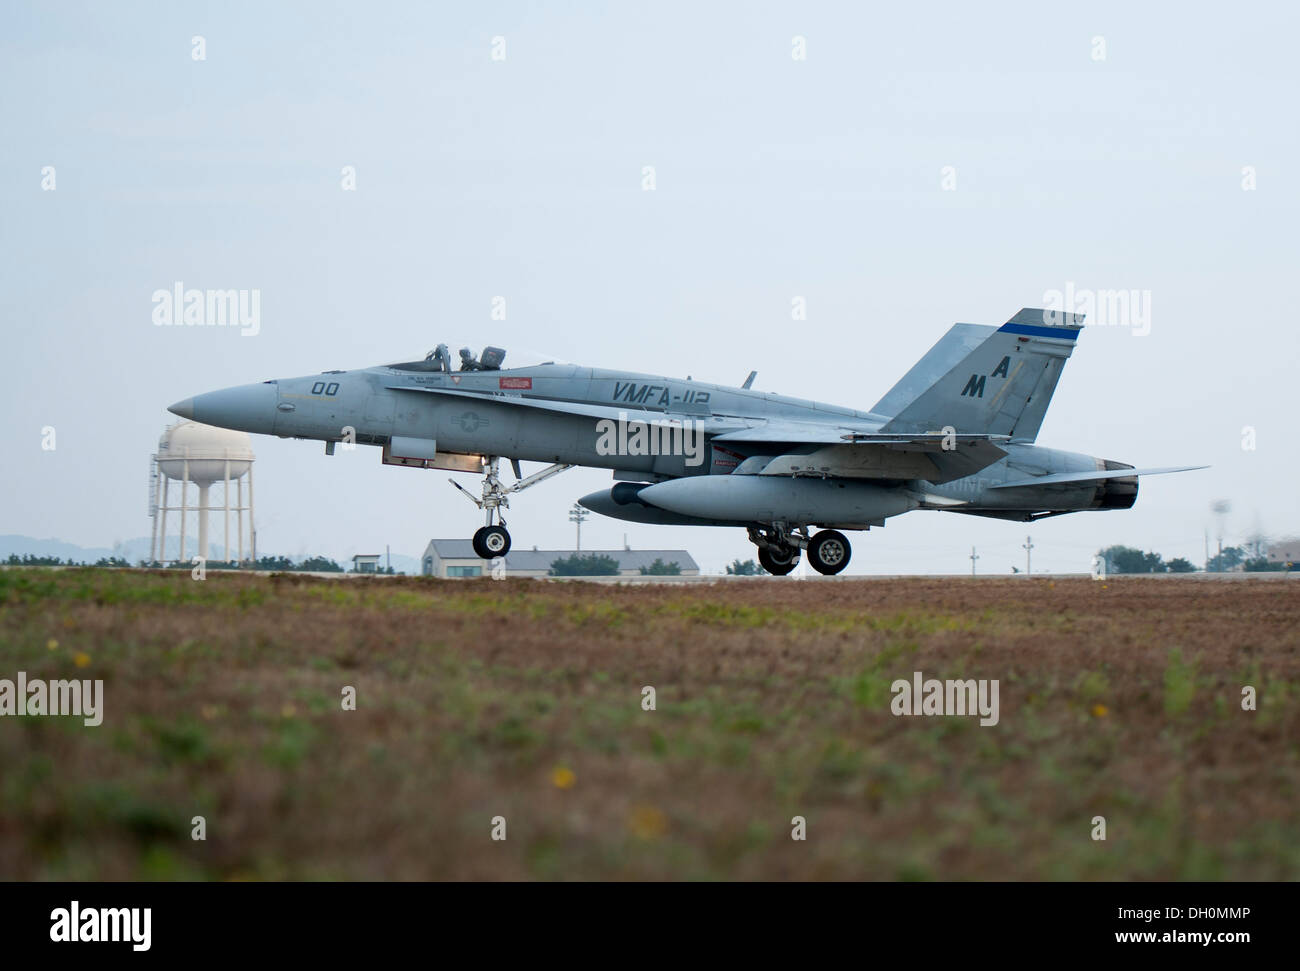 New Photo 6 Sizes! U.S Marine Corps F/A-18 Hornet Fighter Jet Aircraft